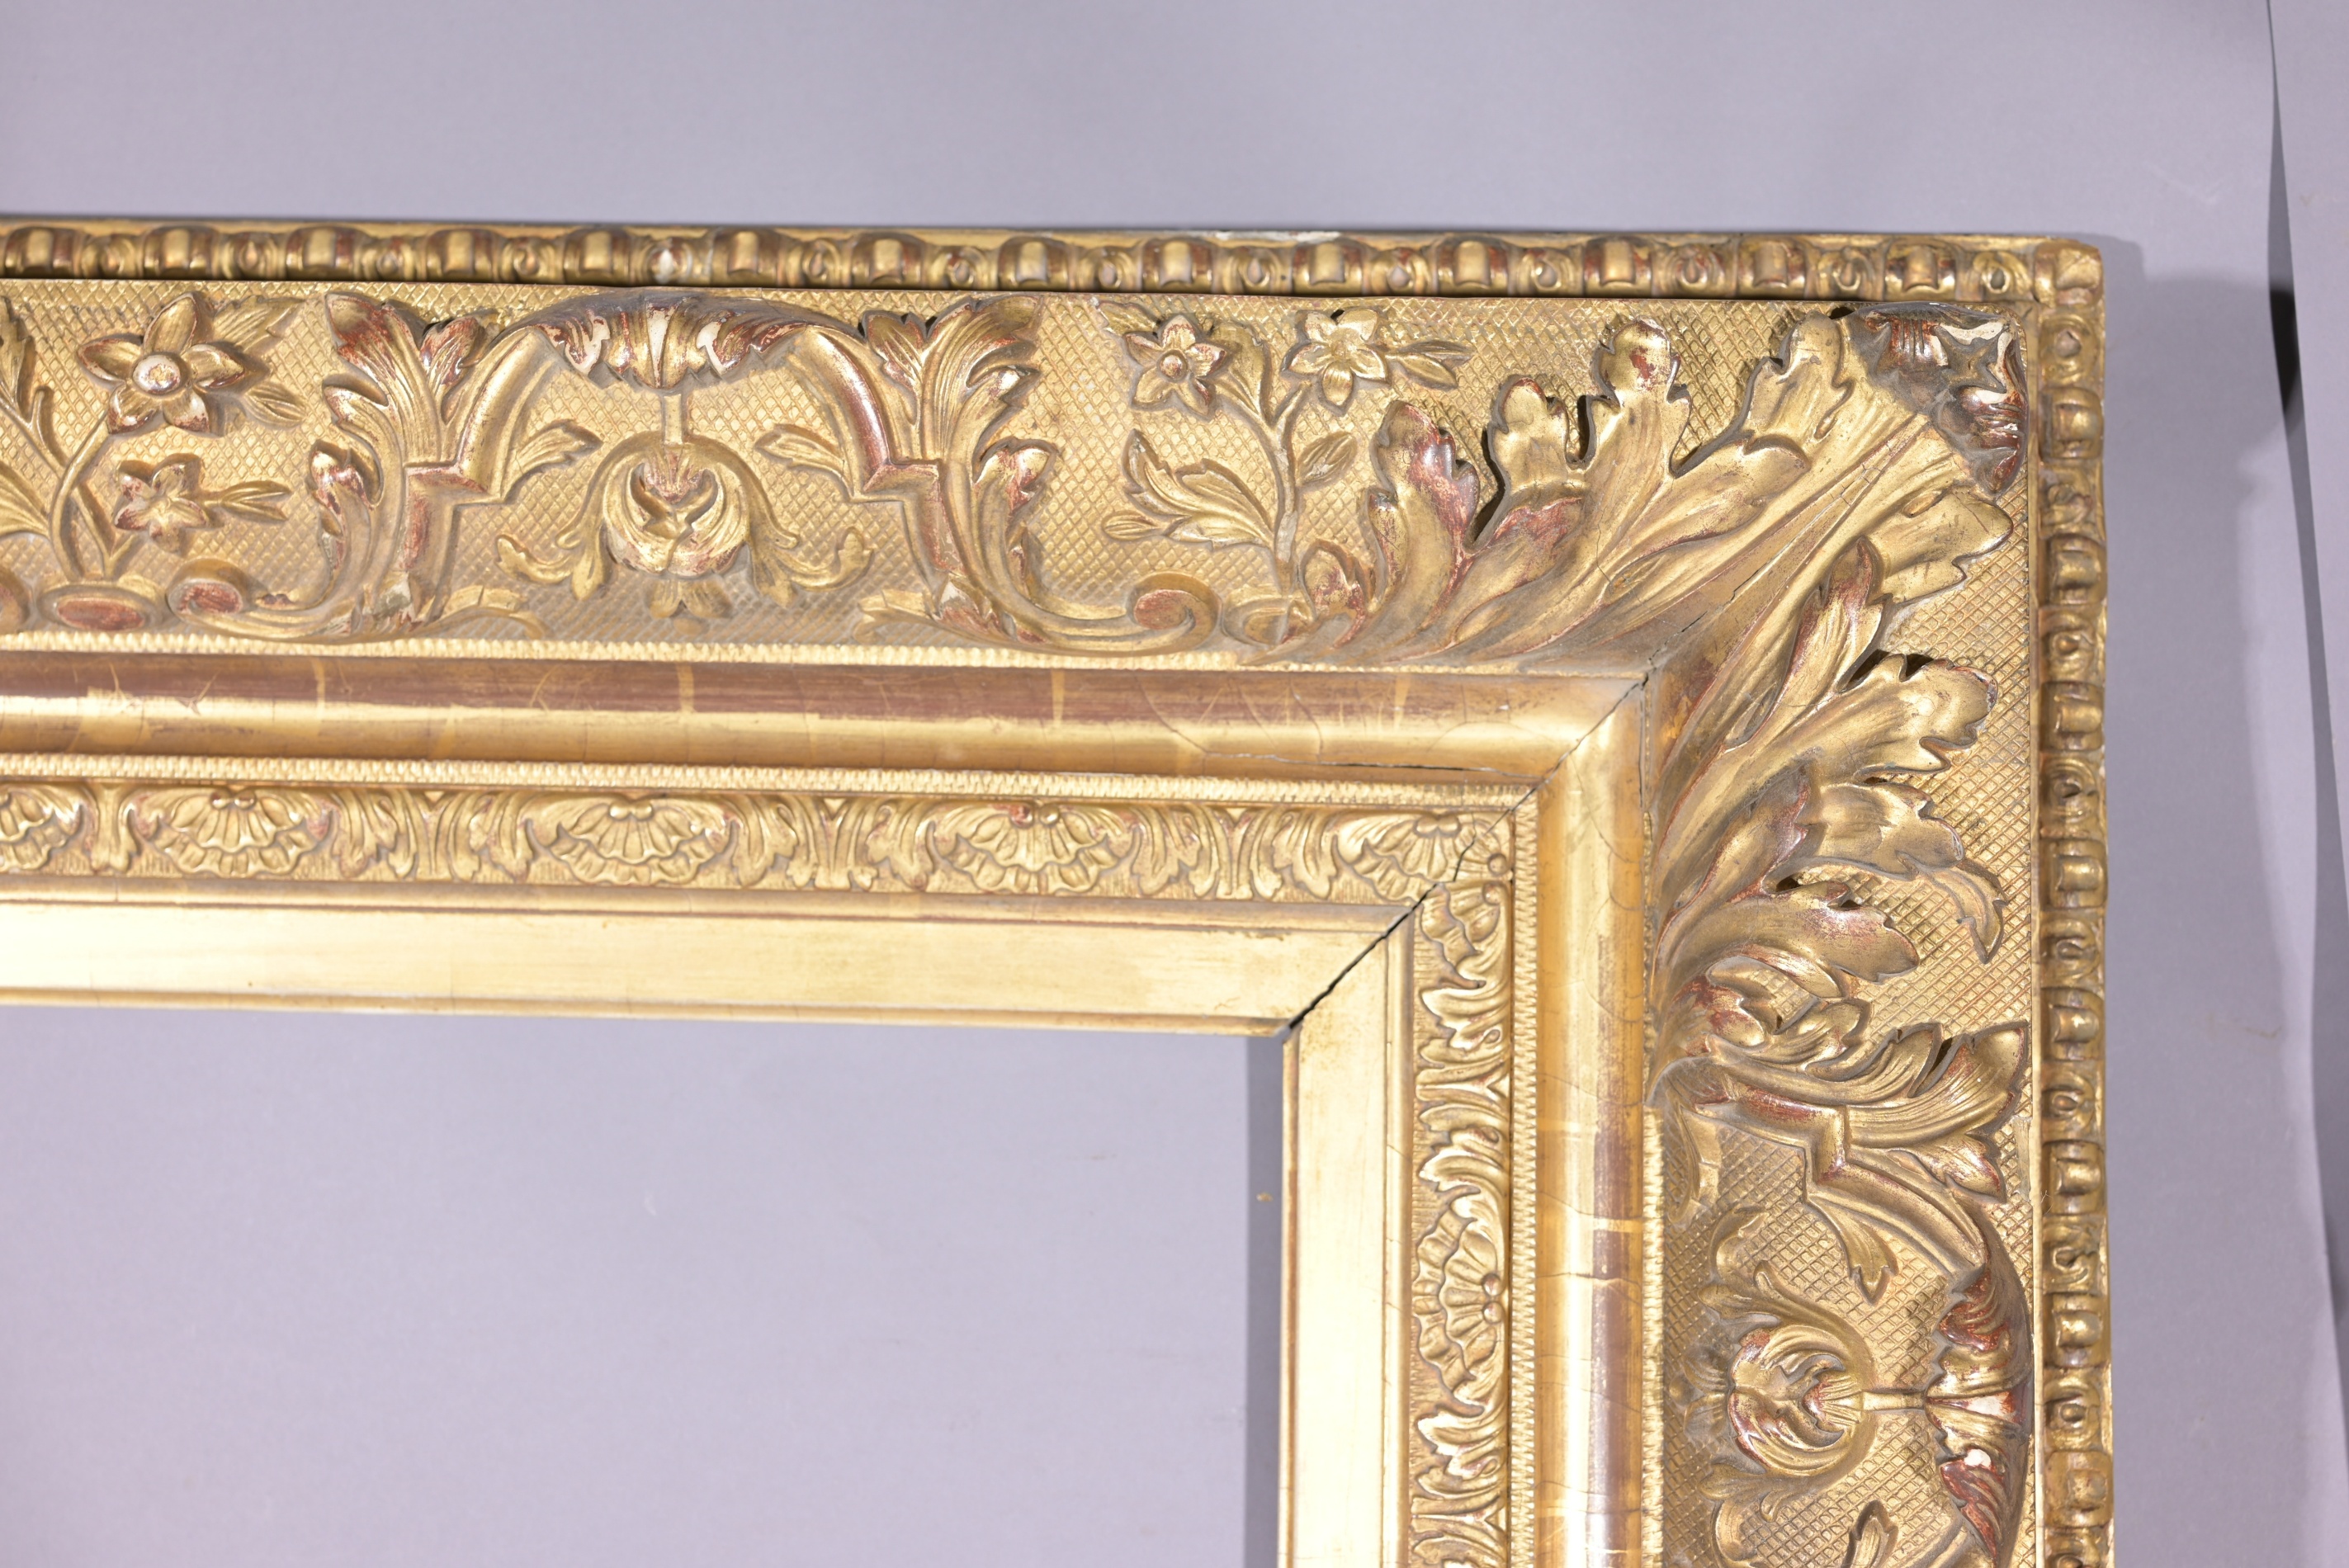 French 19th C Gilt Wood Frame - 37 x 21.75 - Image 4 of 9